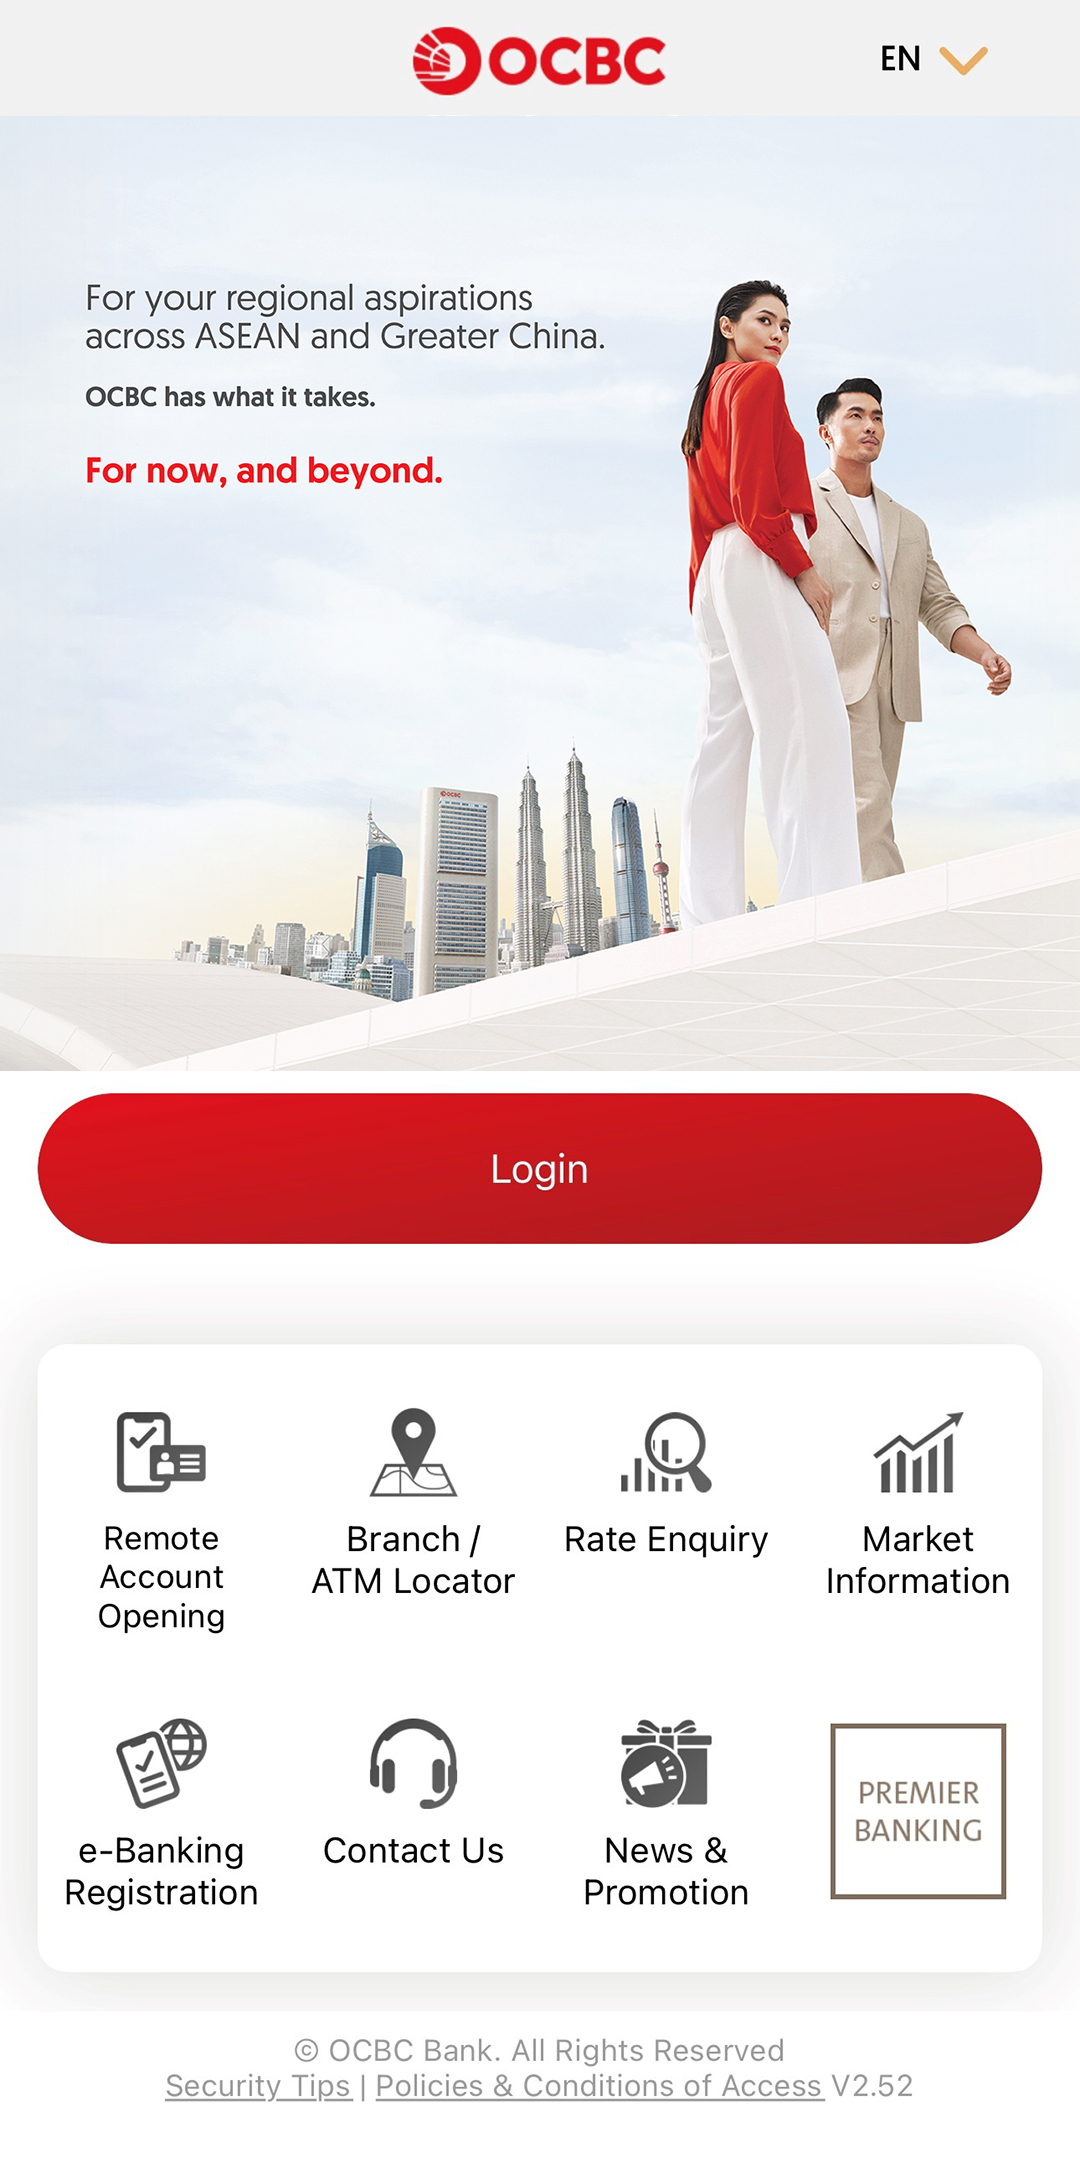 Download the OCBC Bank mobile app, select “Login” on home page